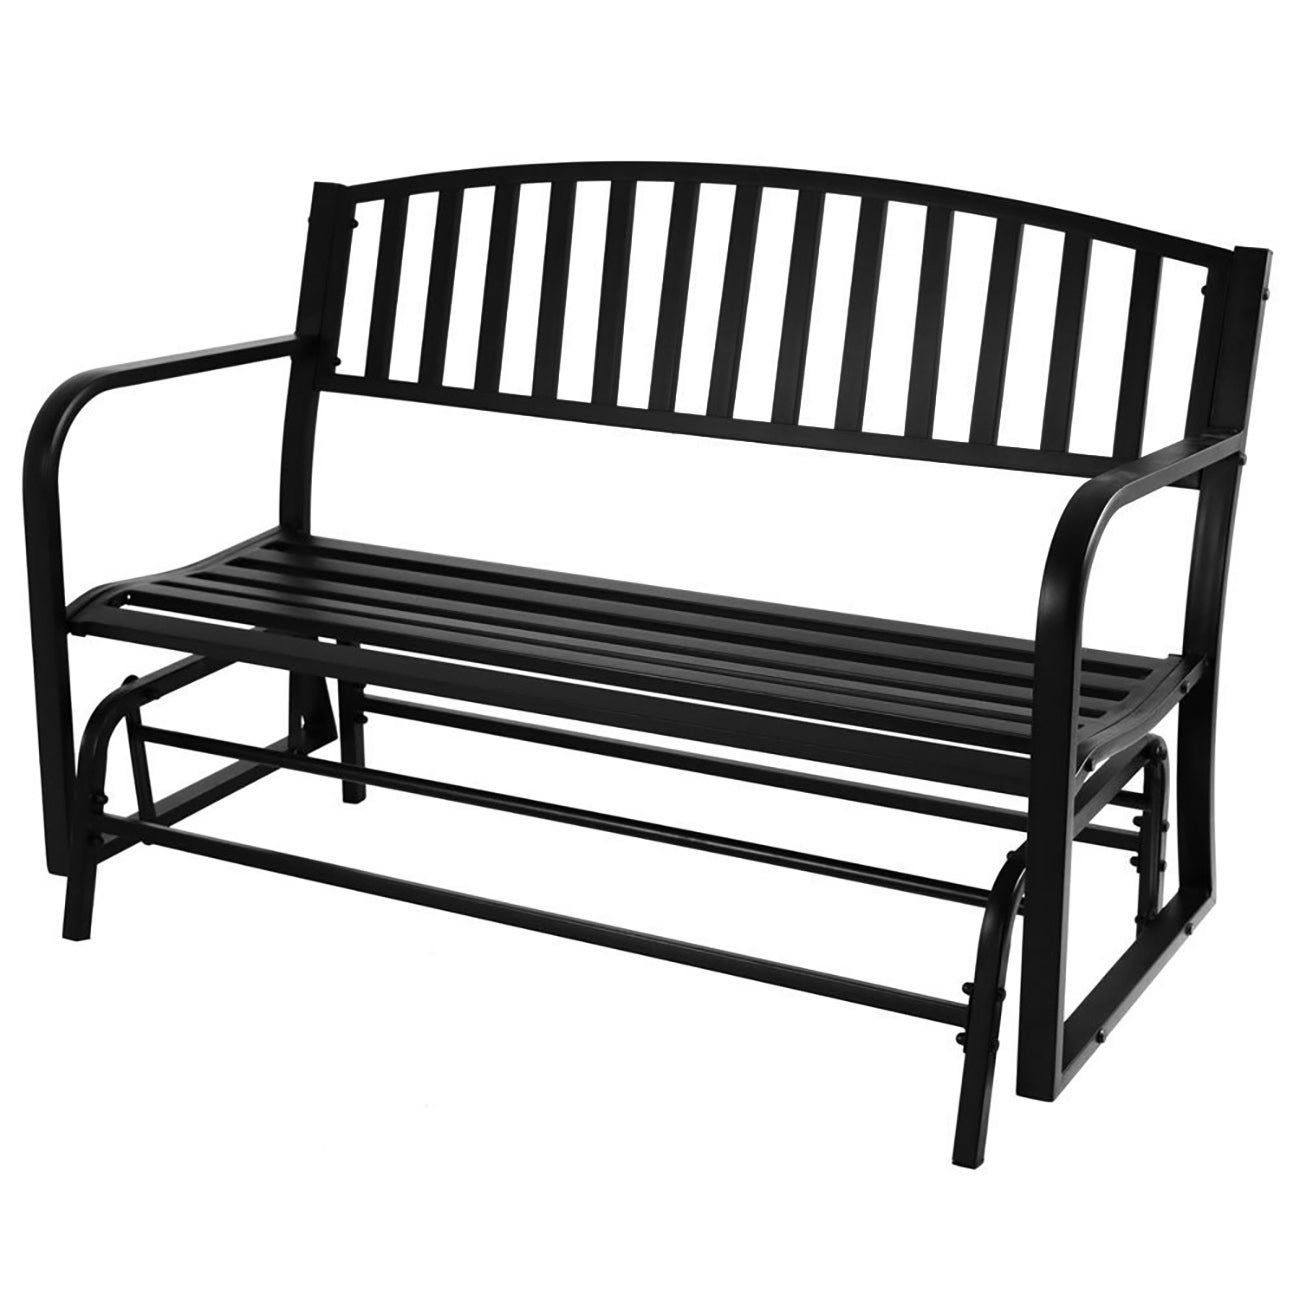 Outsunny 50 L Steel Garden Bench Outdoor Patio 2 Person Park Throughout 2 Person Black Wood Outdoor Swings (View 21 of 25)